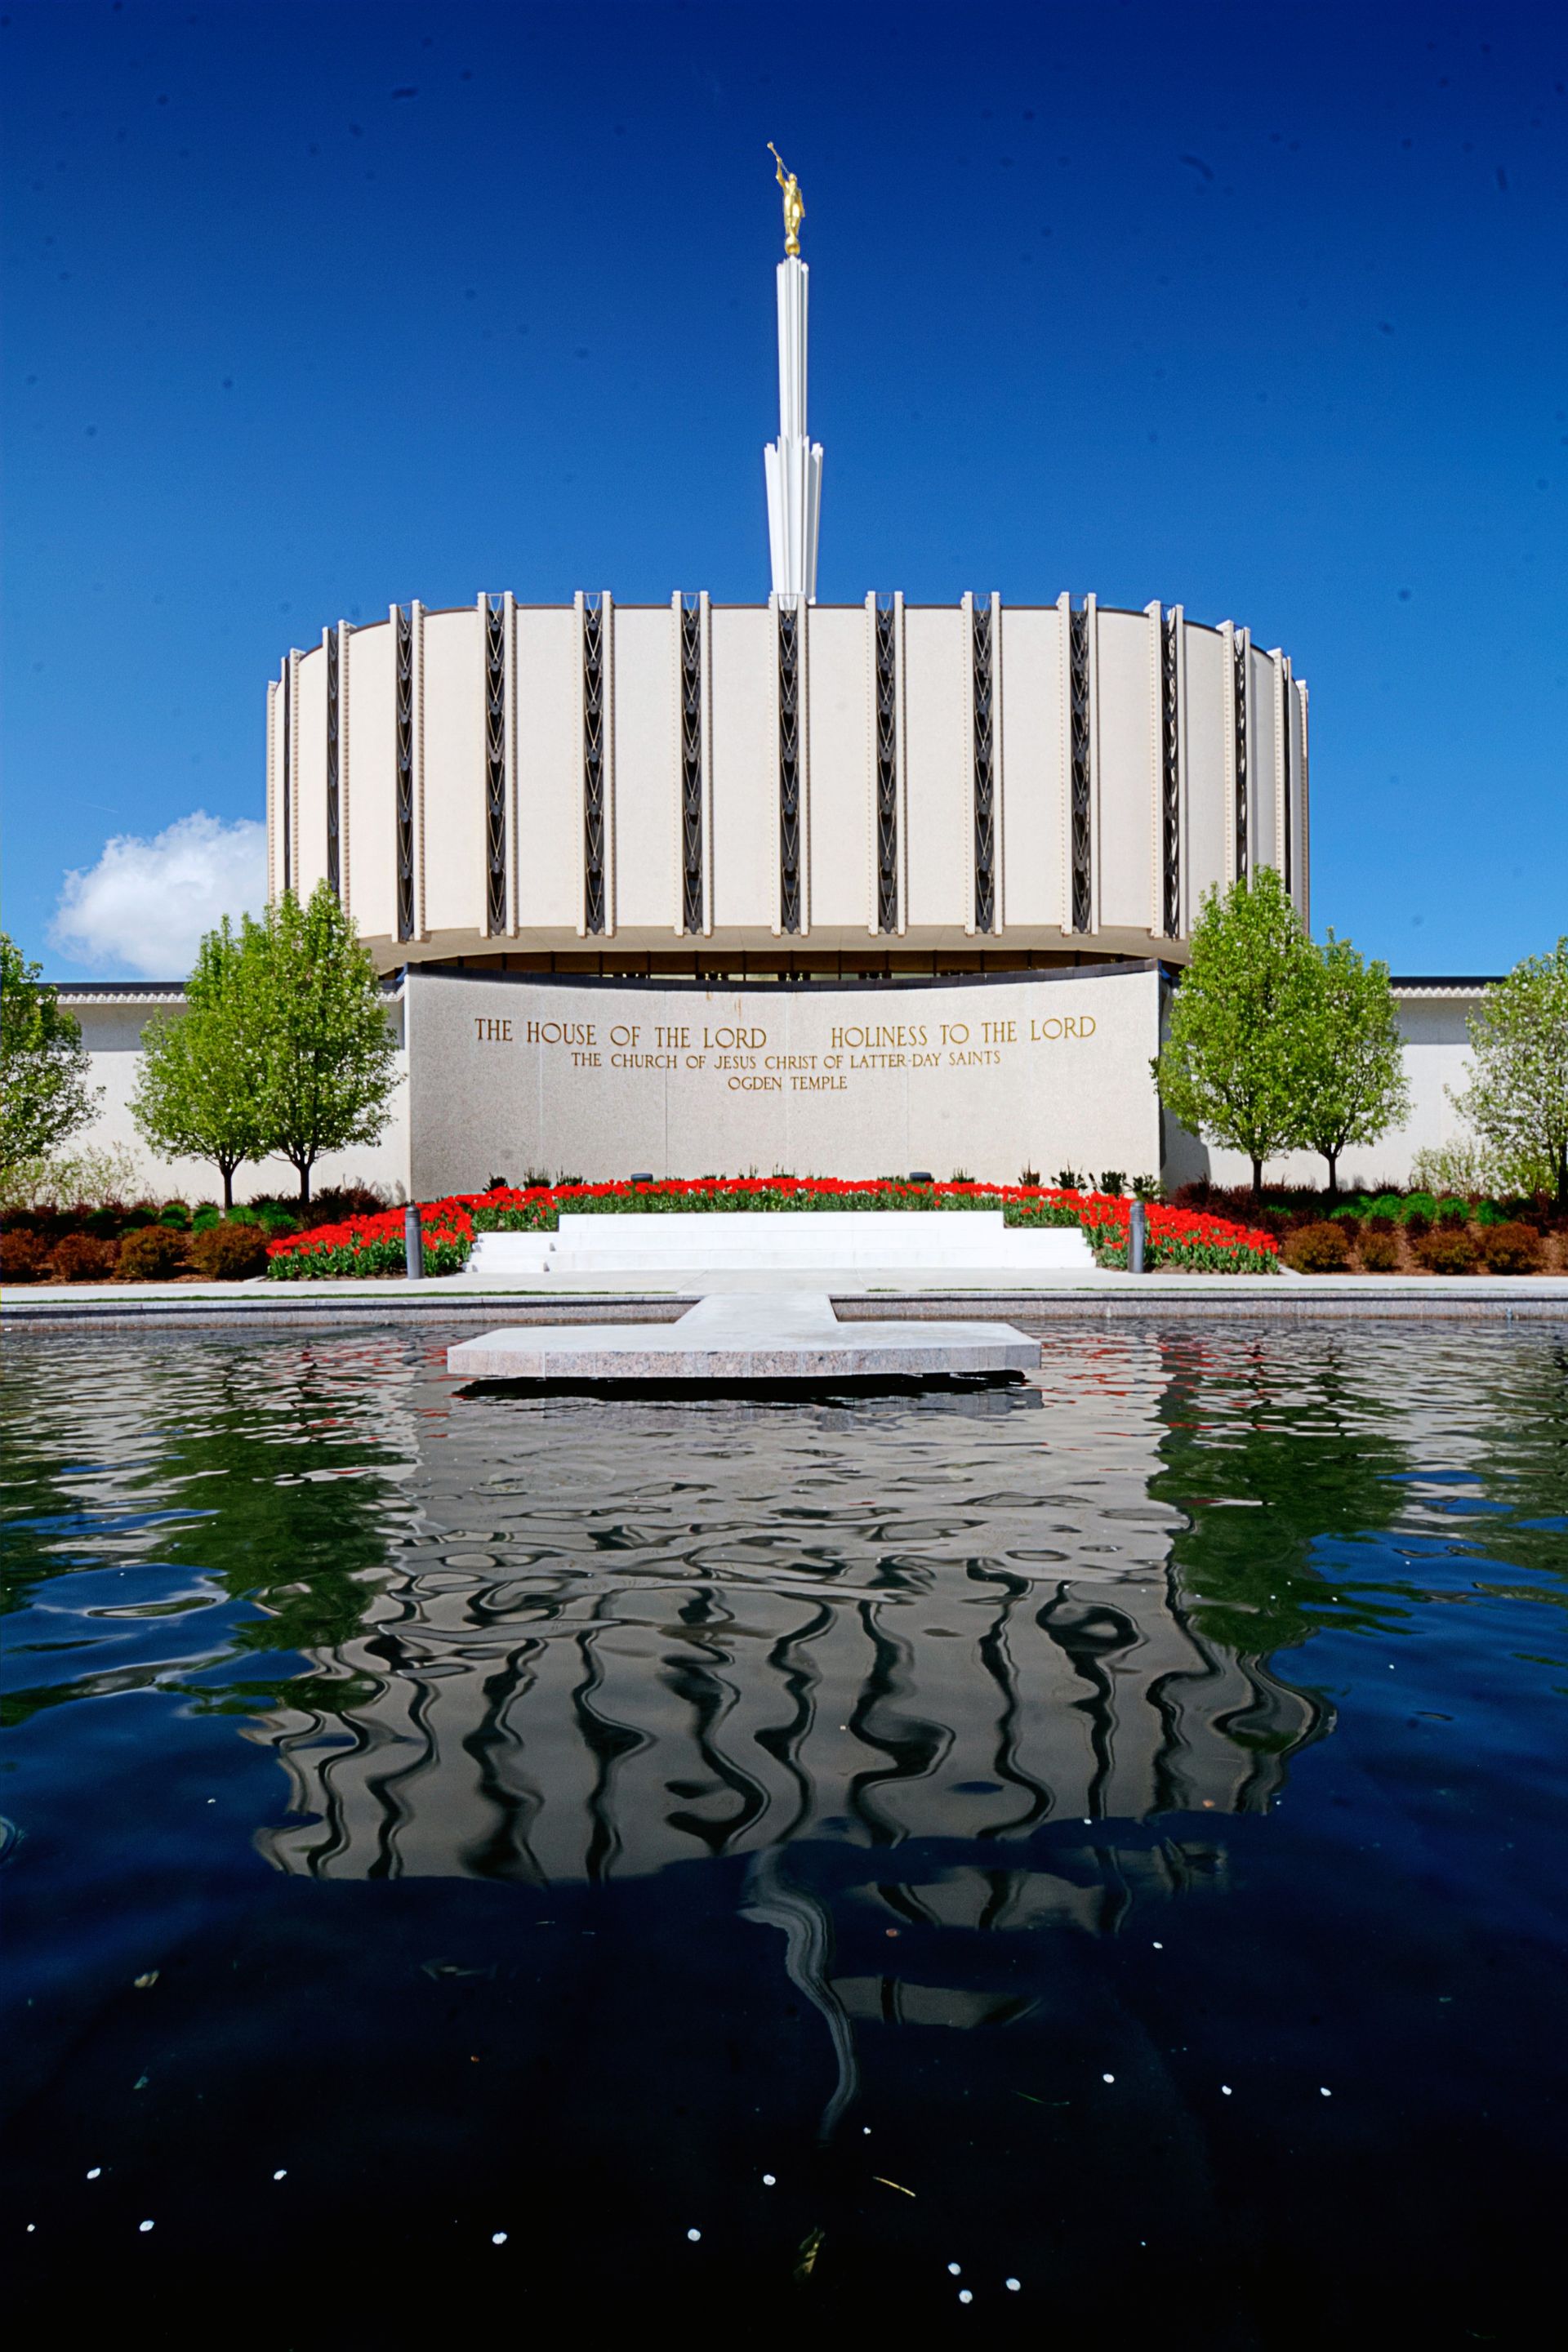 The old Ogden Utah Temple reflecting pond, including the “Holiness to the Lord: The House of the Lord” sign.